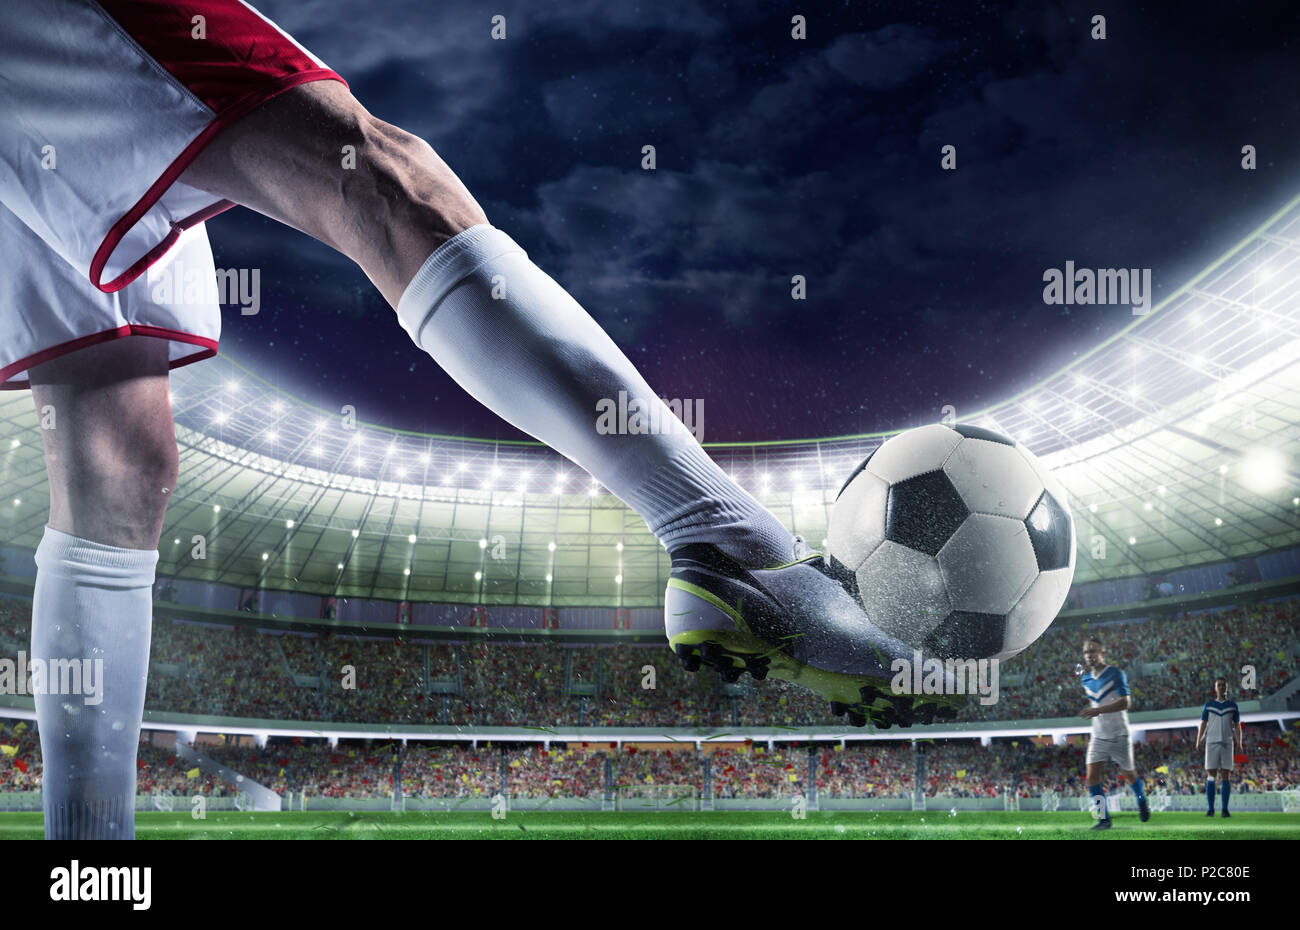 Soccer player with soccerball at the stadium ready for the match Stock Photo